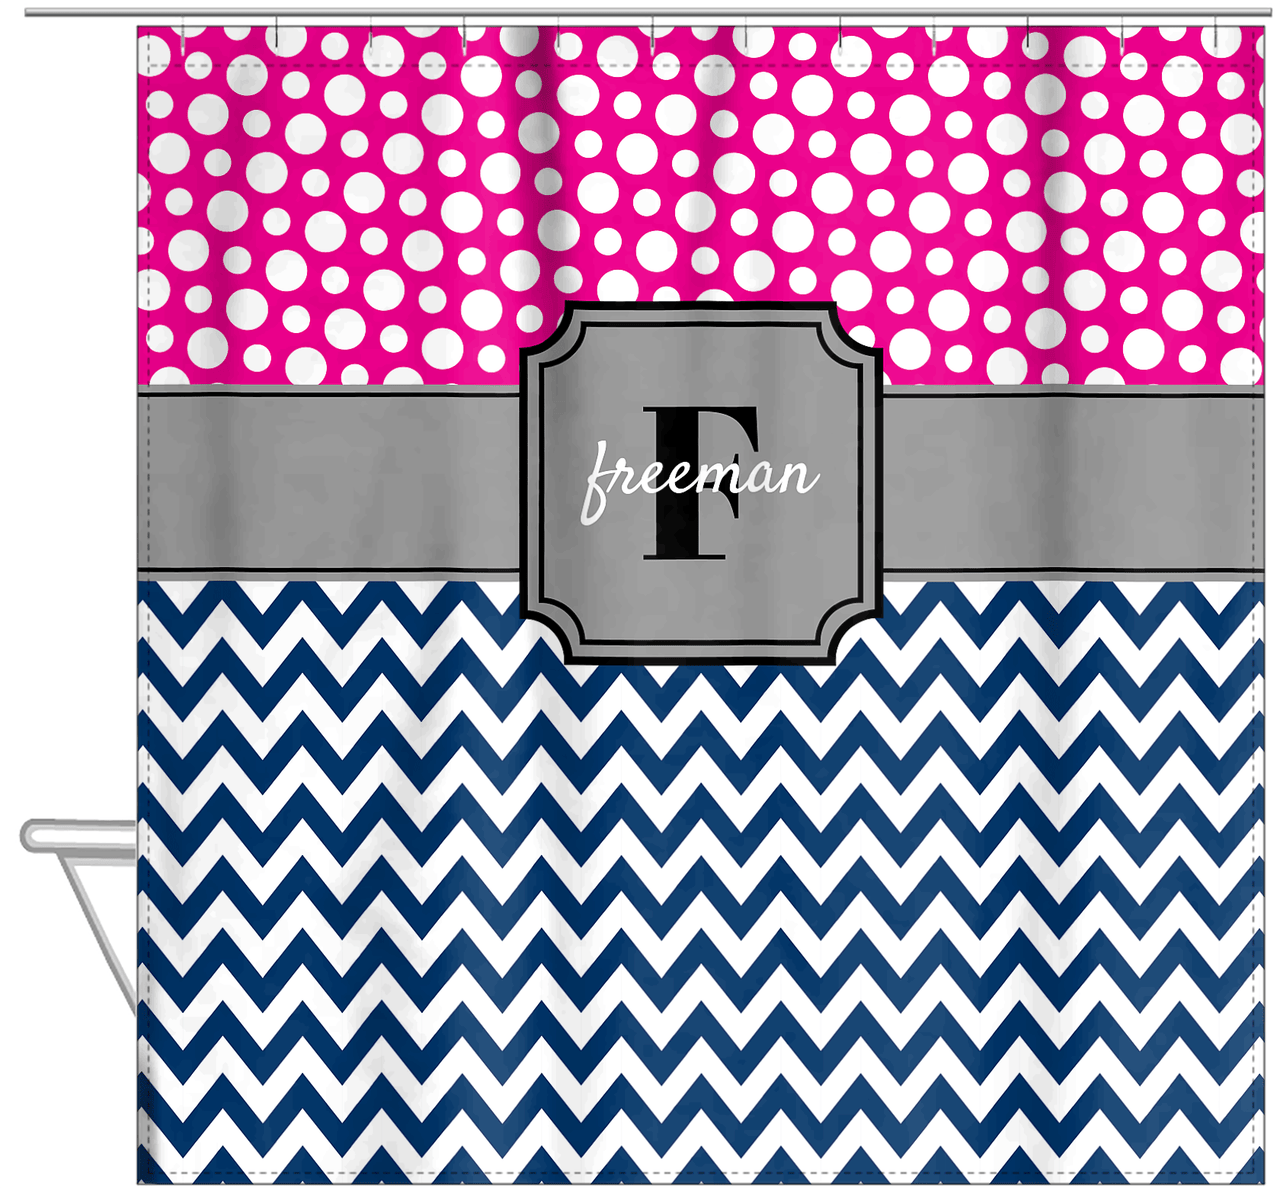 Personalized Polka Dots and Chevron I Shower Curtain - Pink and Navy - Stamp Nameplate - Hanging View